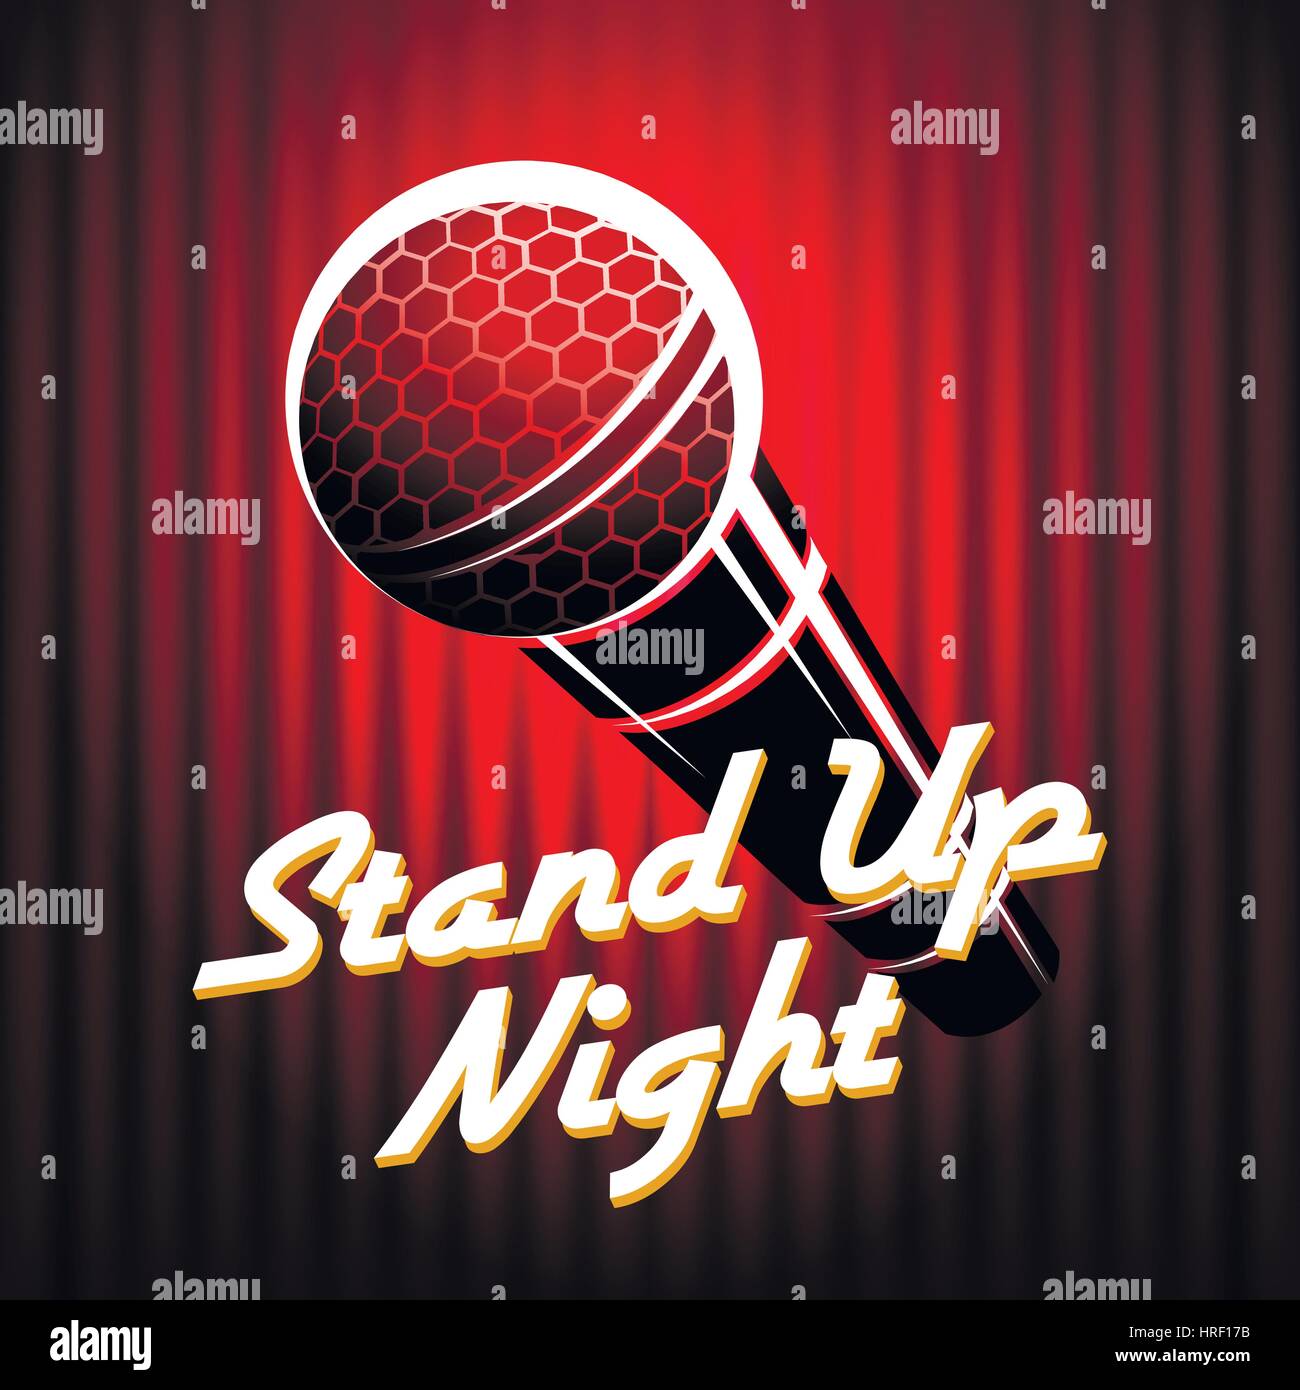 Microphone emblem against red curtain background with wording Stand Up Night. Comedian night show or battle party design. Vector illustration. Stock Vector